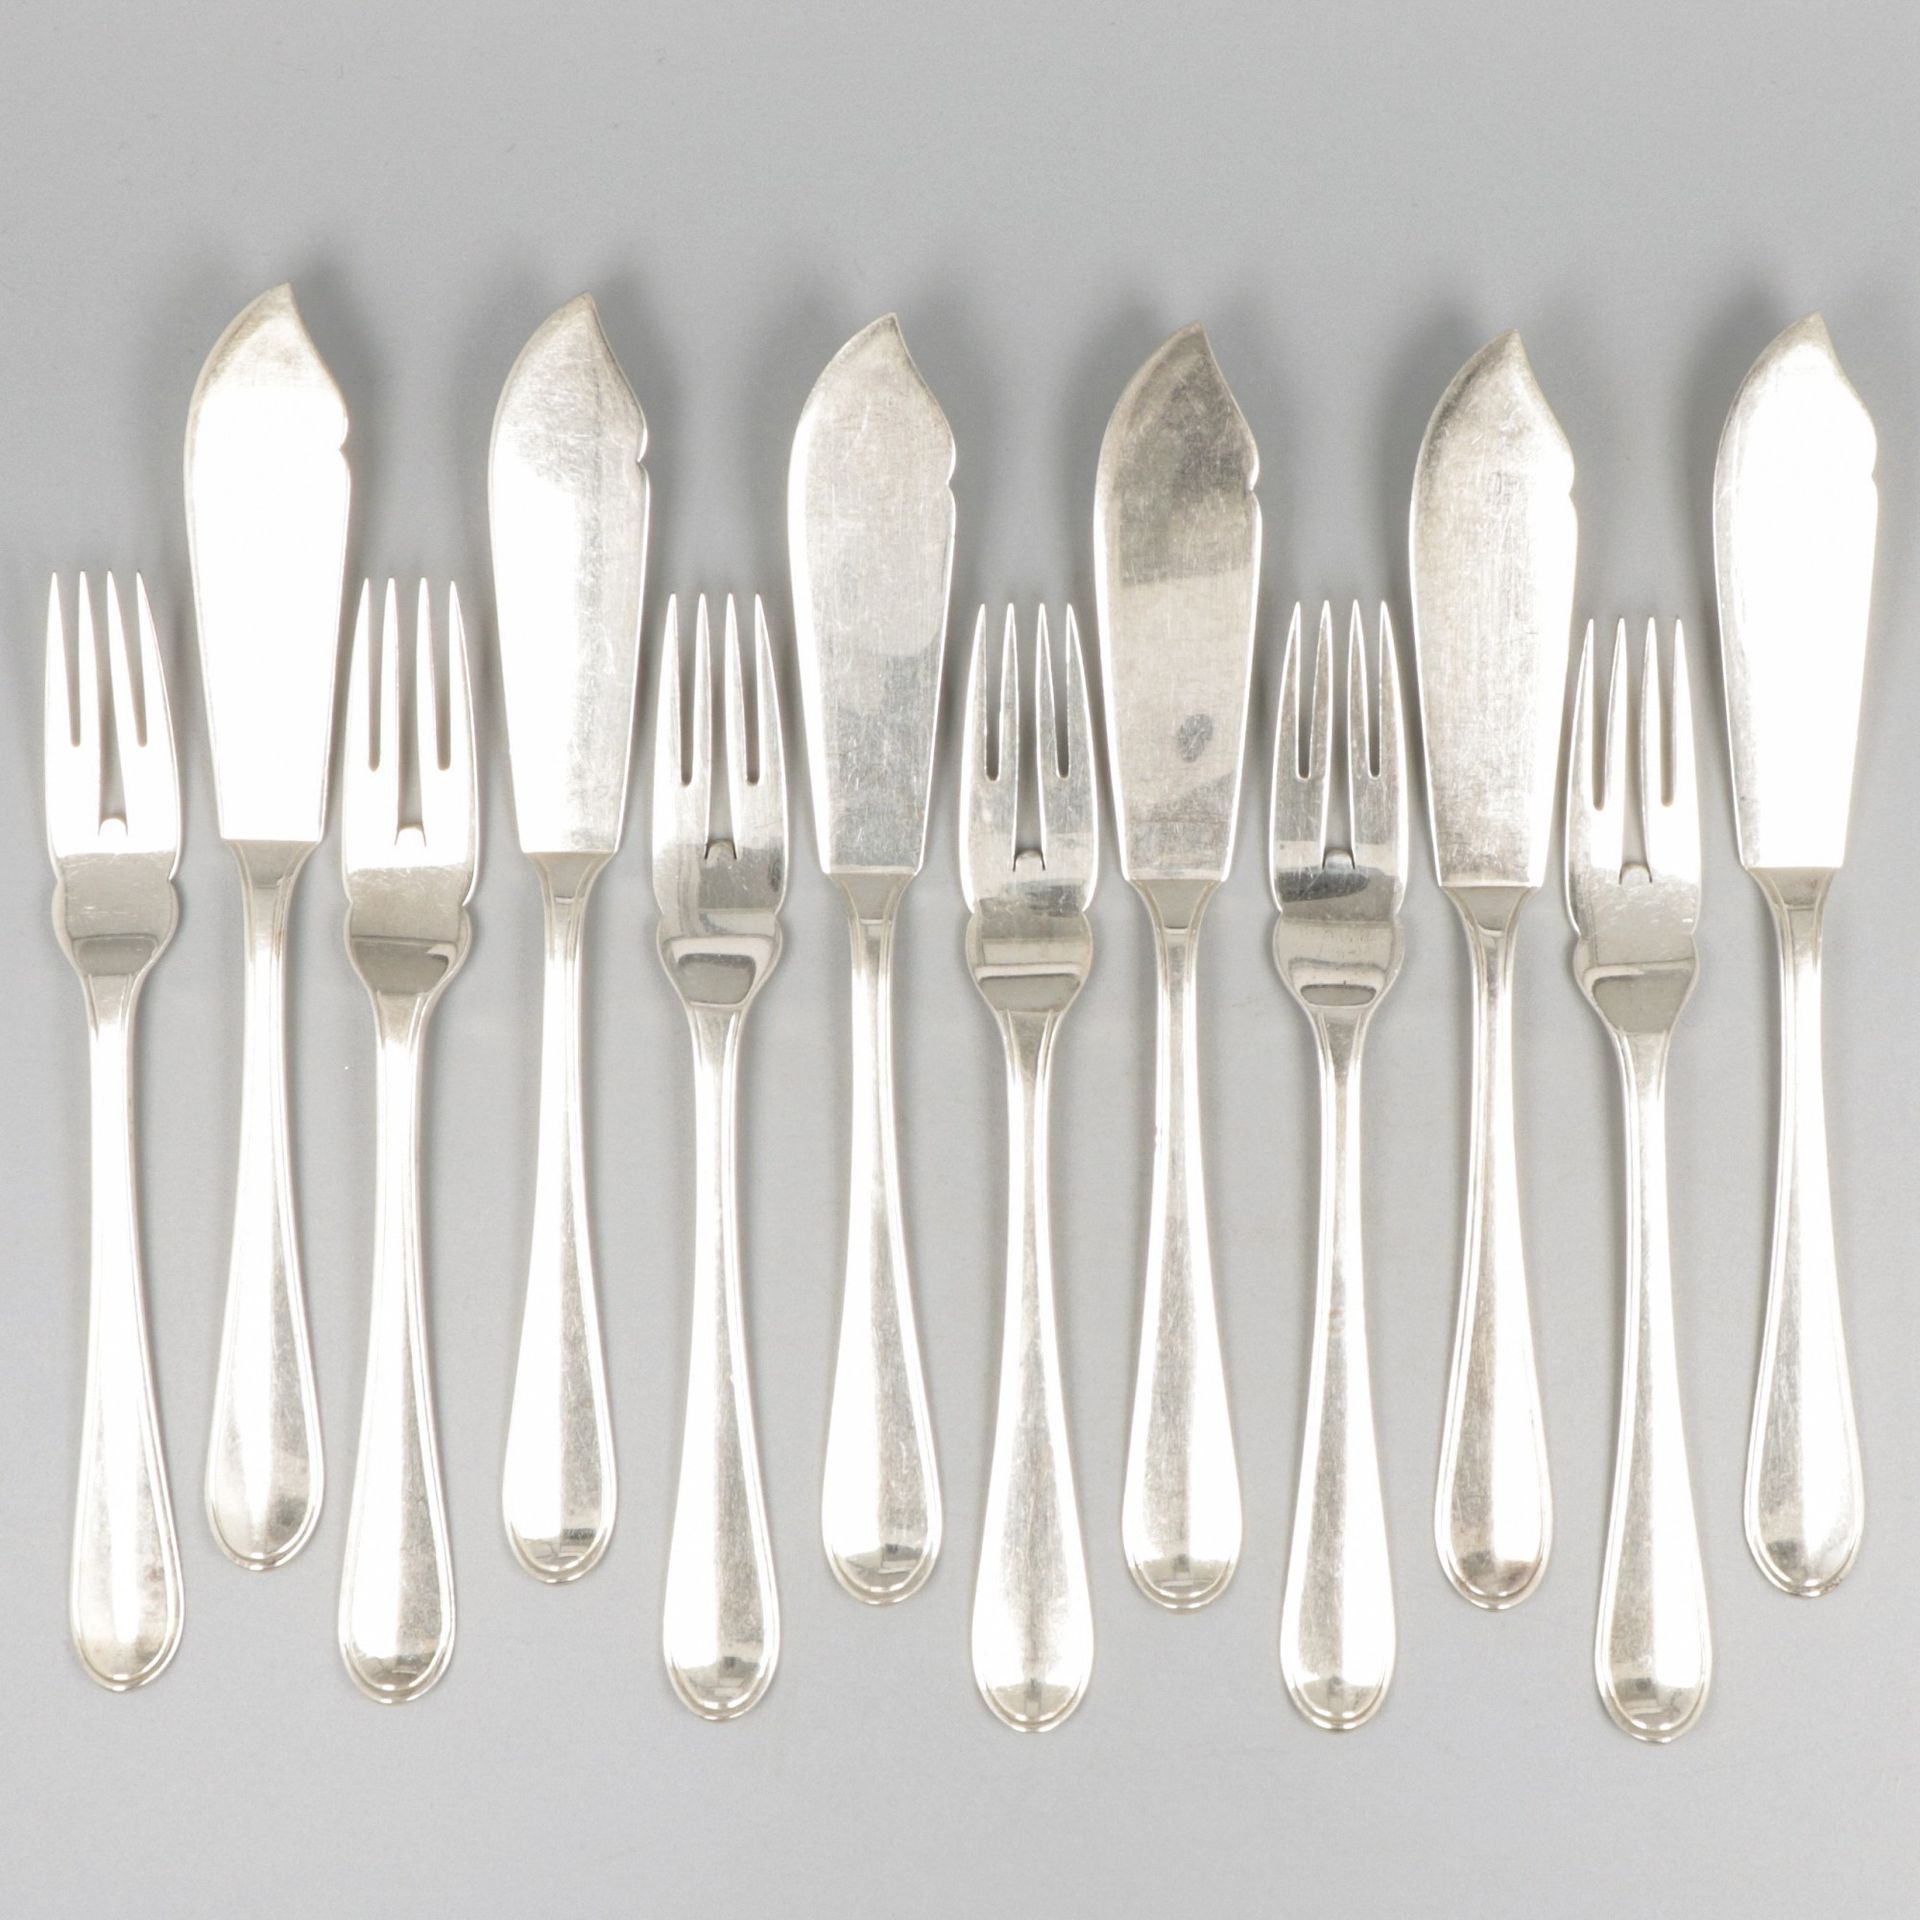 12-piece set of silver fish cutlery. "Hollands Rondfilet" or Dutch round filet. &hellip;